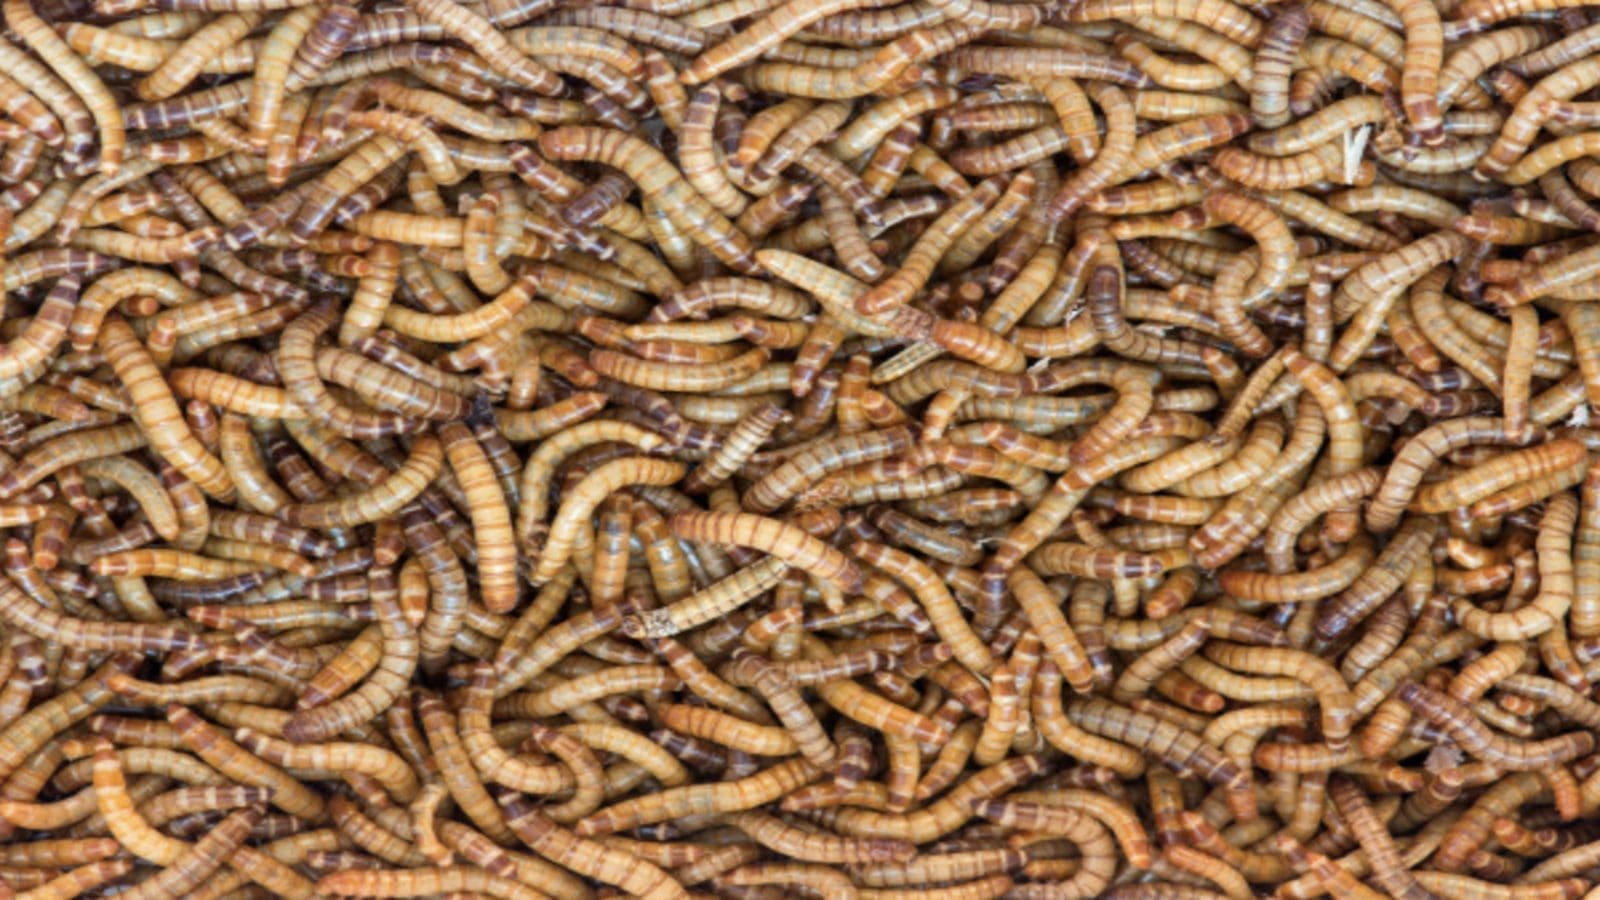 Insectum unveils innovative system for sustainable production of black soldier fly larvae to meet global protein and fat demand